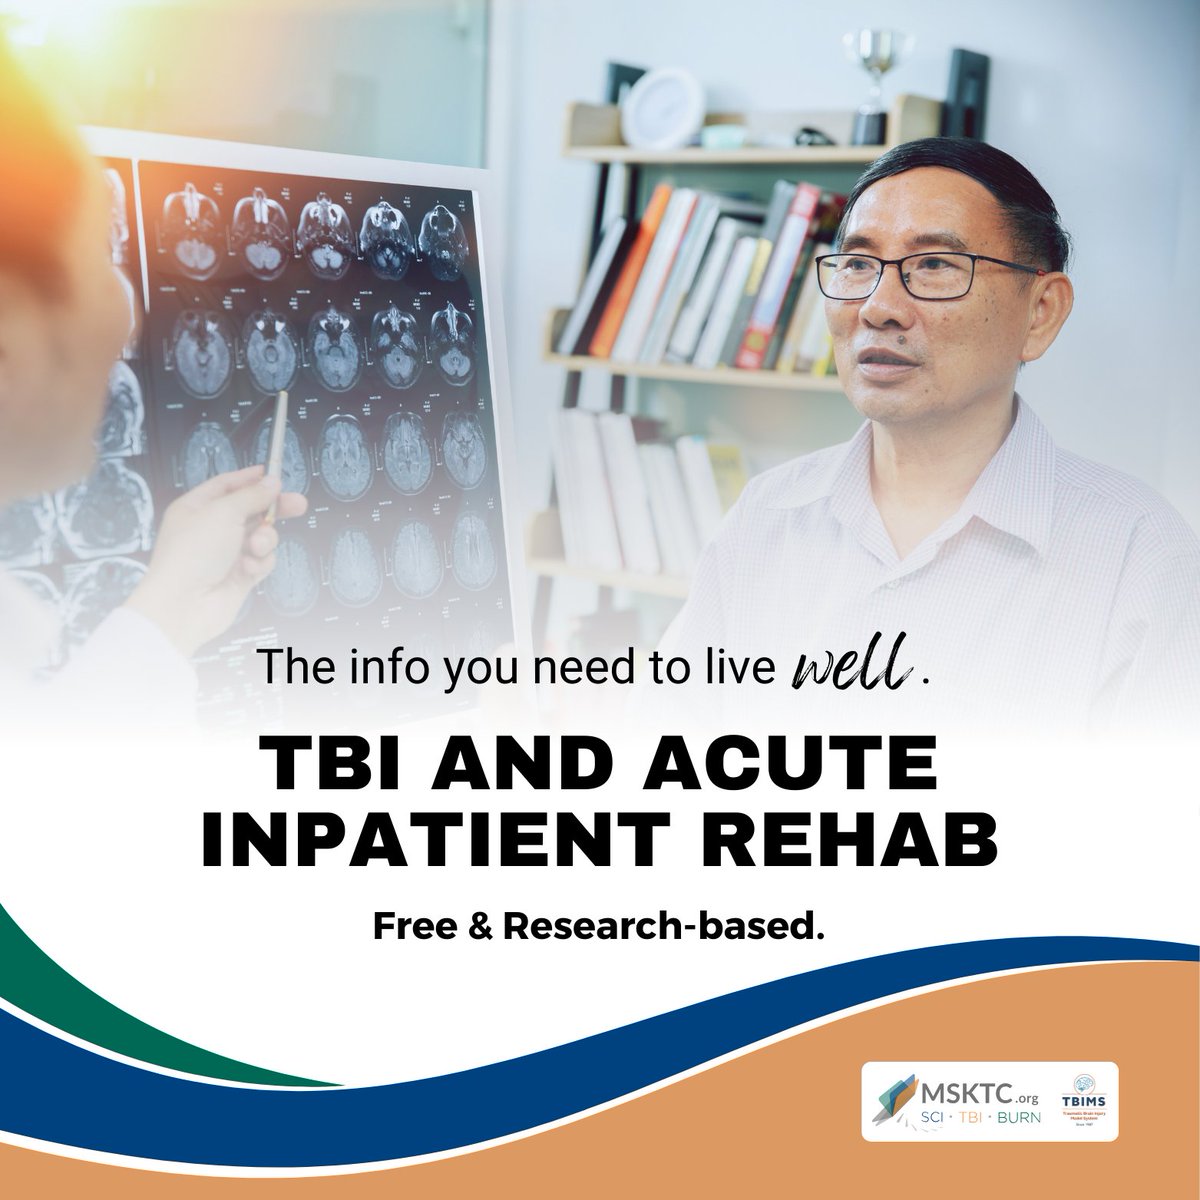 Looking for information on acute inpatient rehabilitation after #TBI? Check out all of these resources from #MSKTC. msktc.org/tbi-topics/acu…